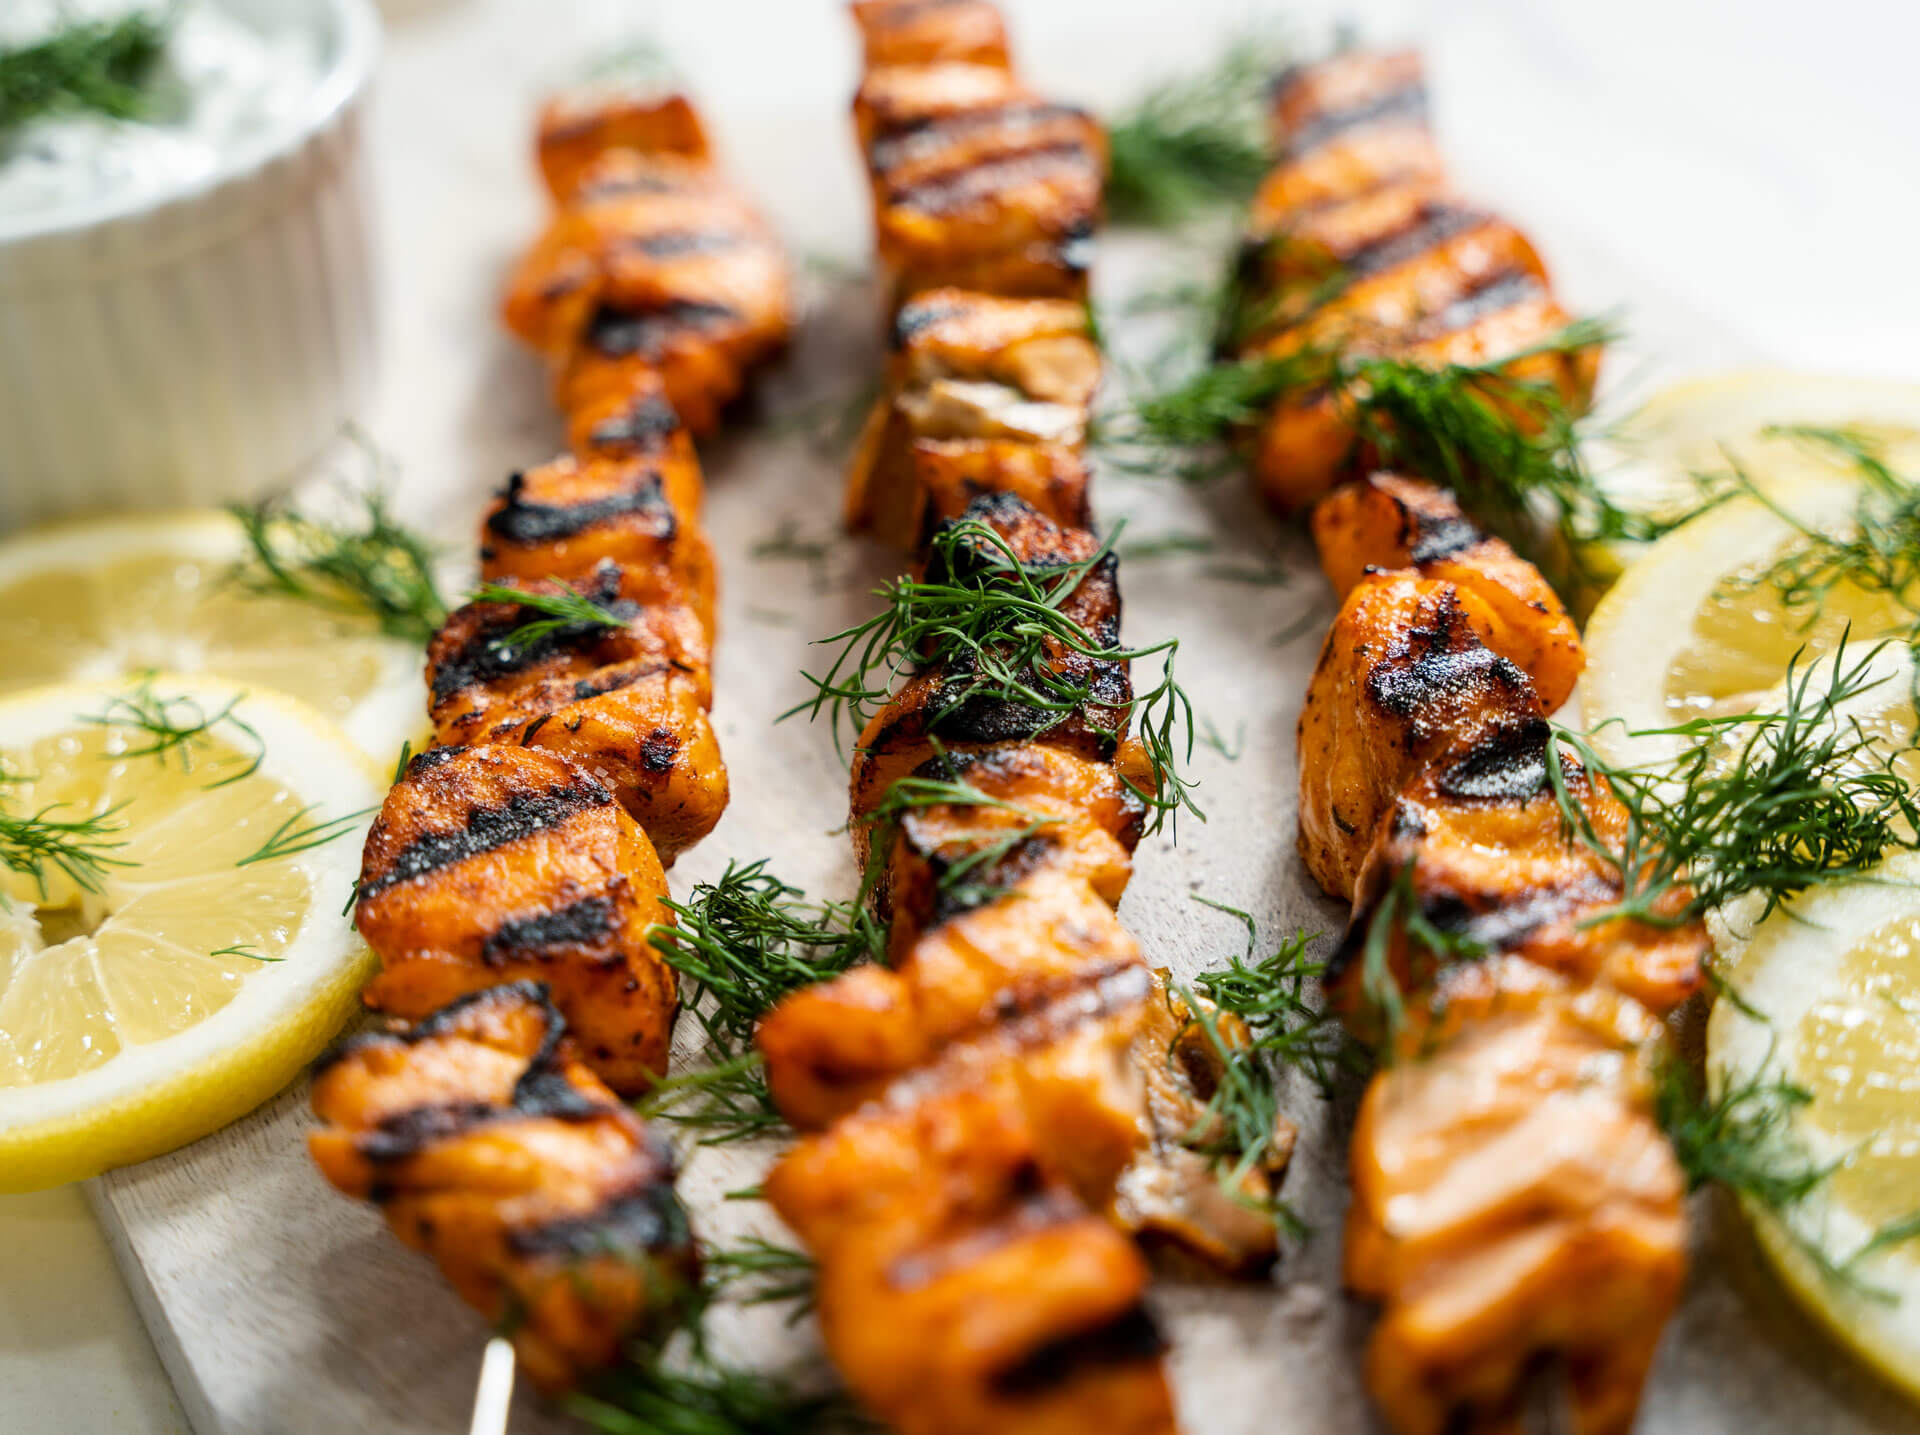 Salmon Skewers & Light Dill Dipping Sauce